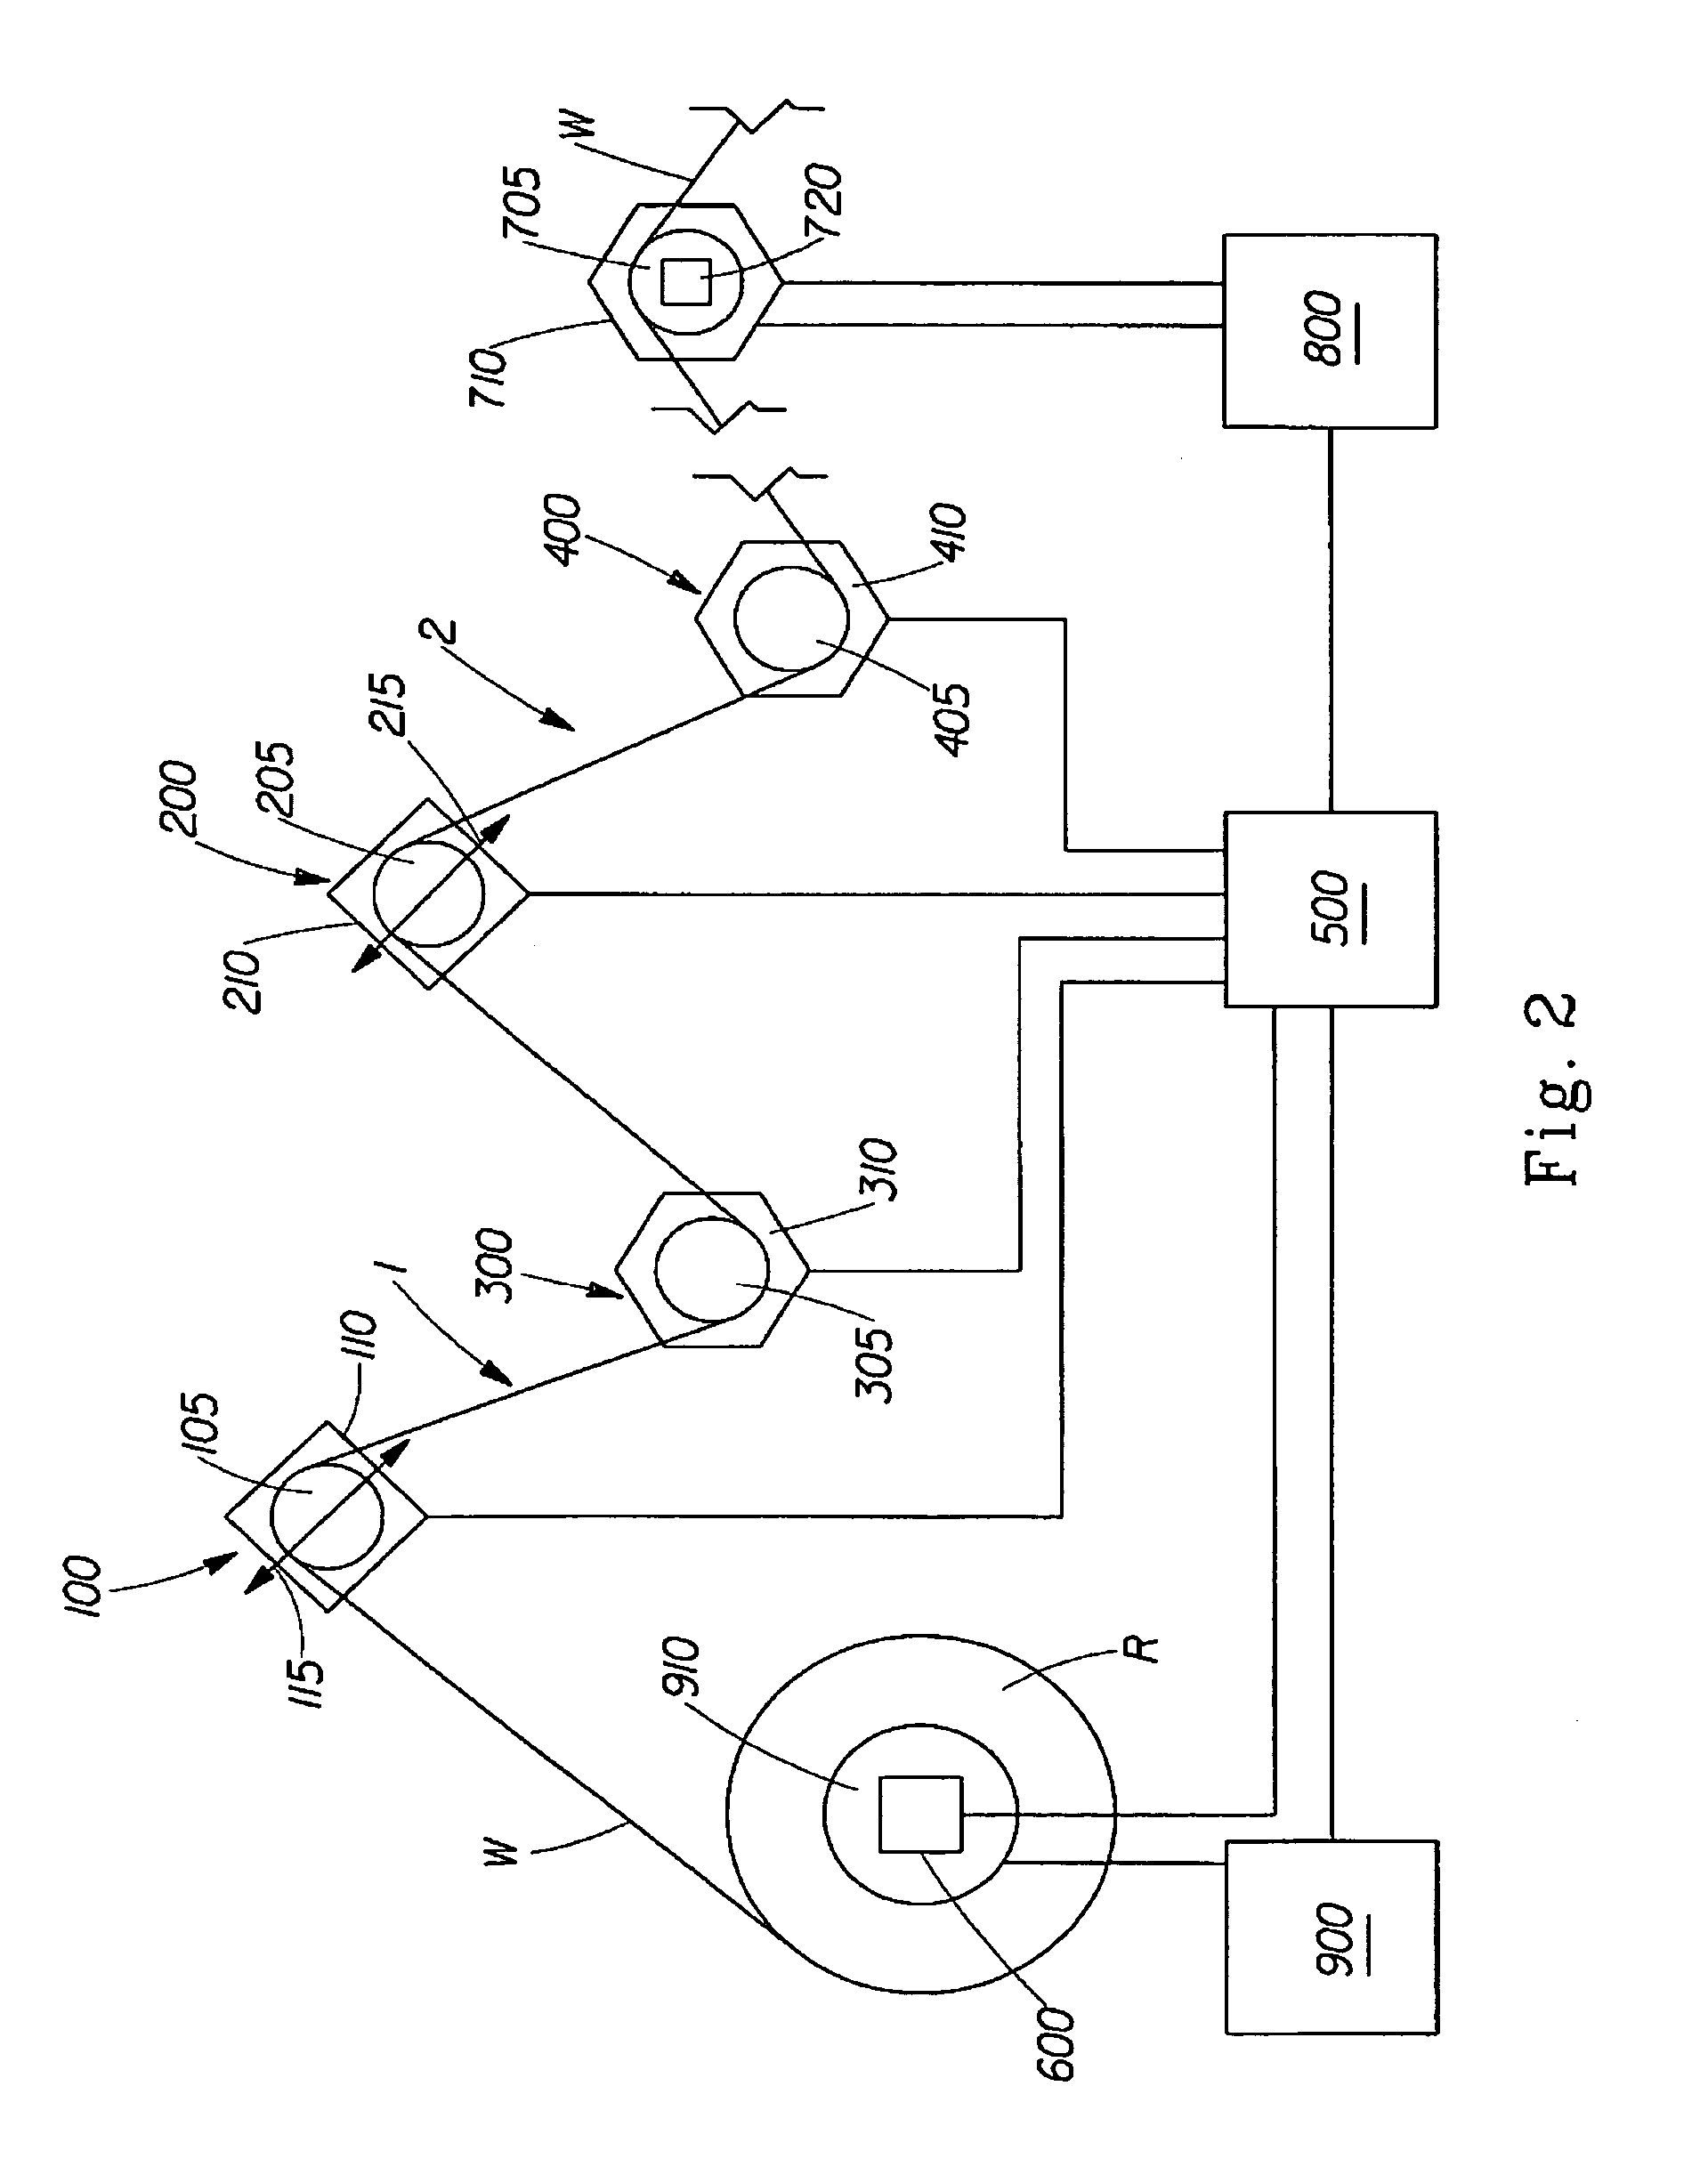 Method of determining a modulus of elasticity of a moving web material